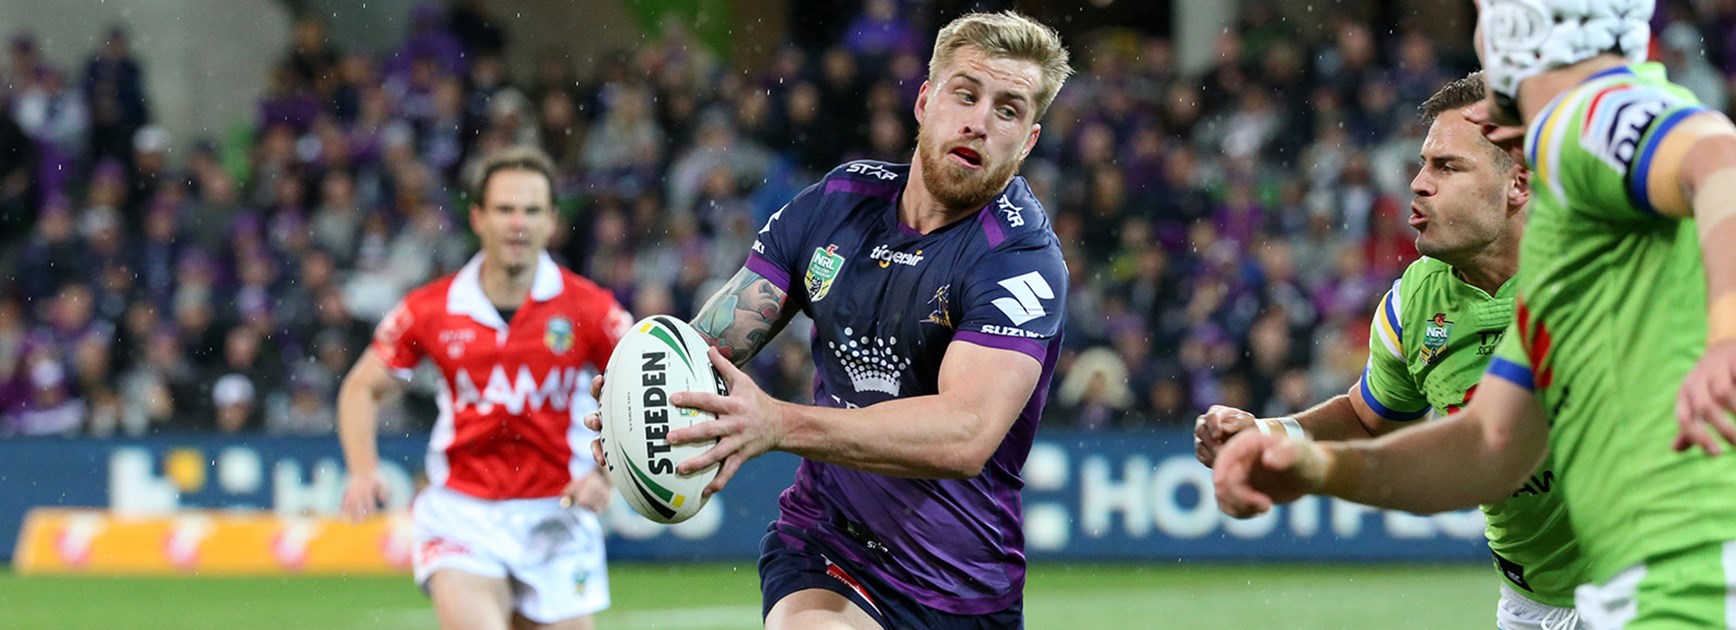 Cameron Munster in action against the Raiders.